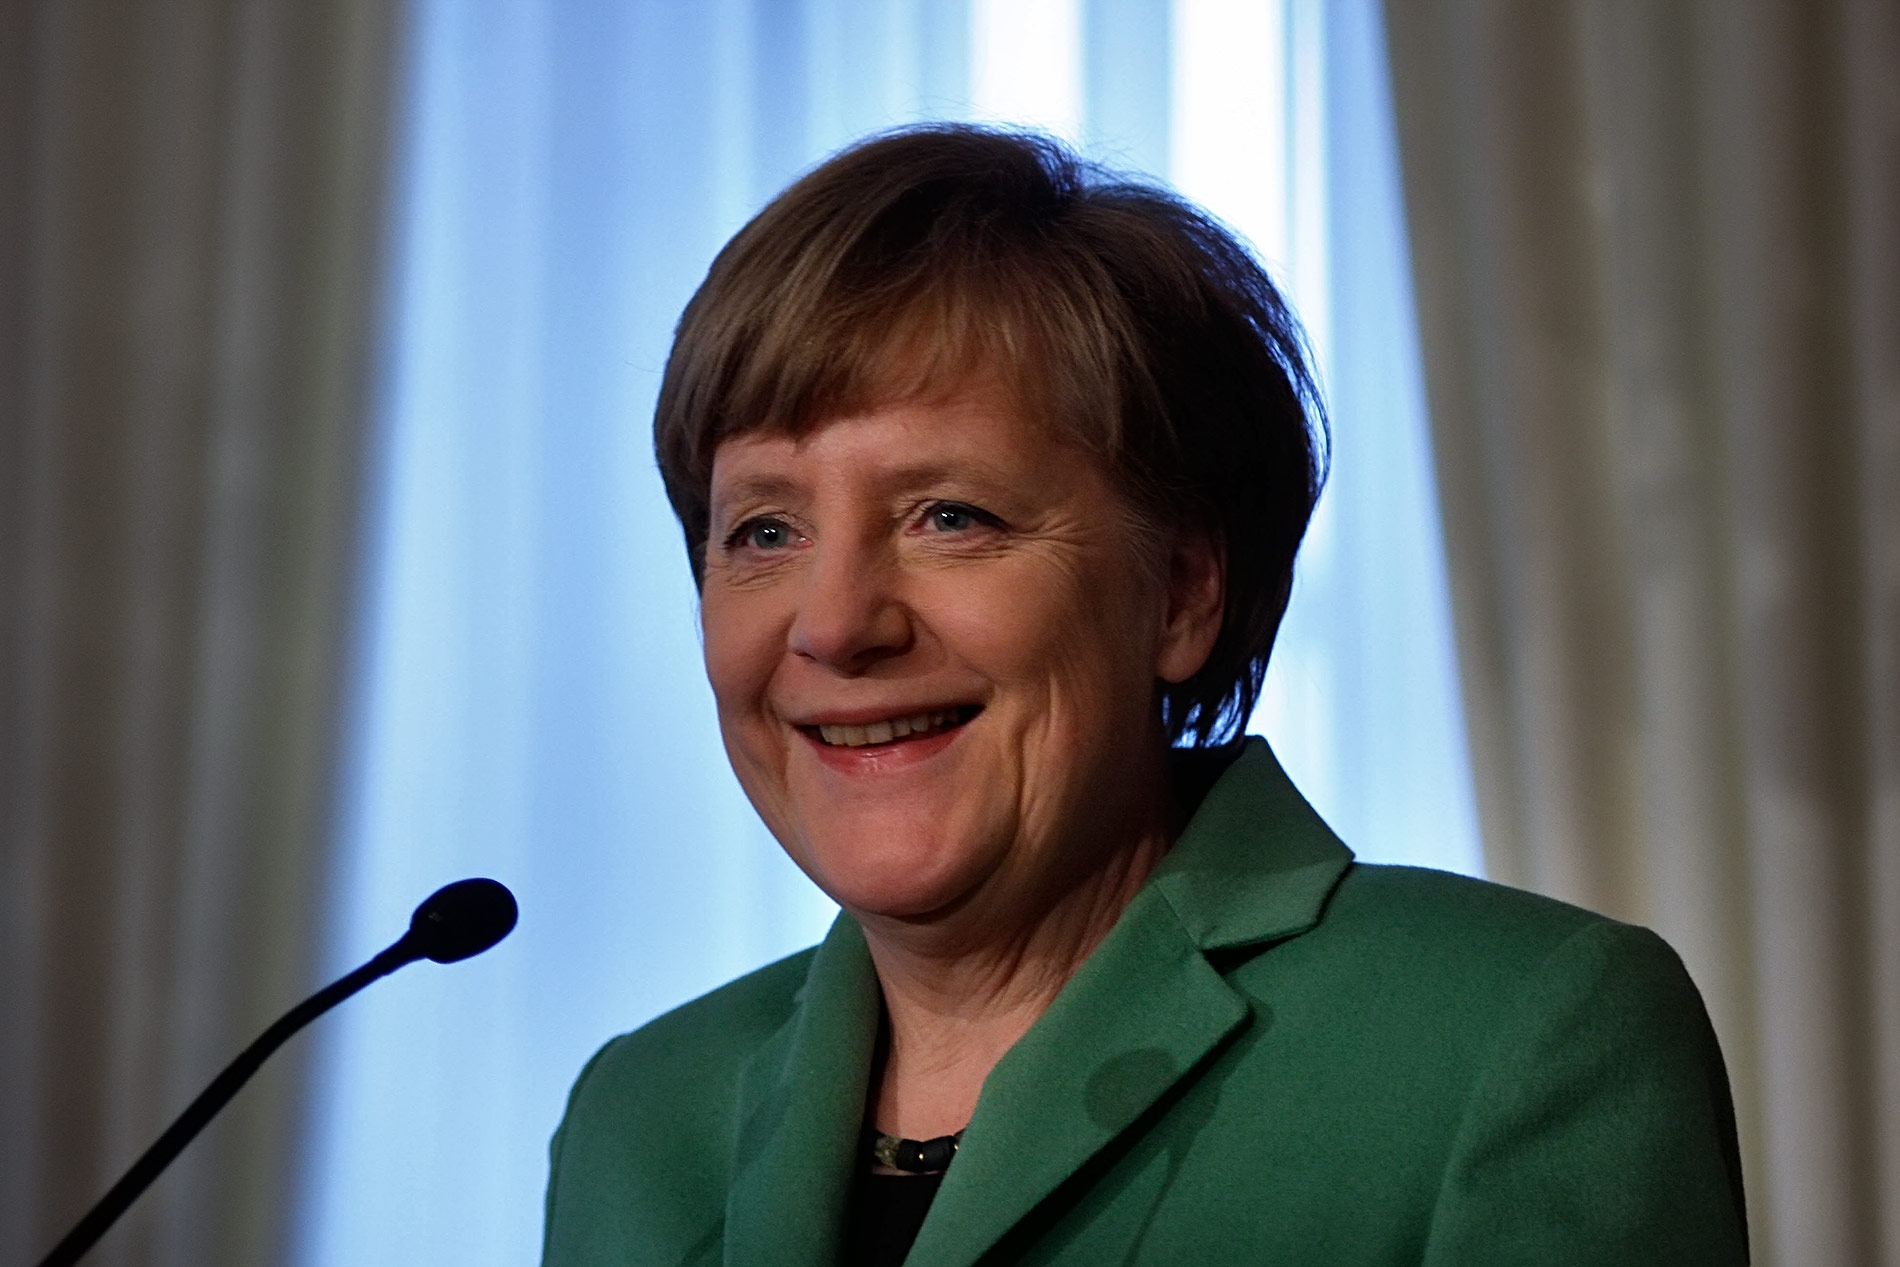 Finnish Government Awards German Chancellor Angela Merkel With Gender Equality Prize